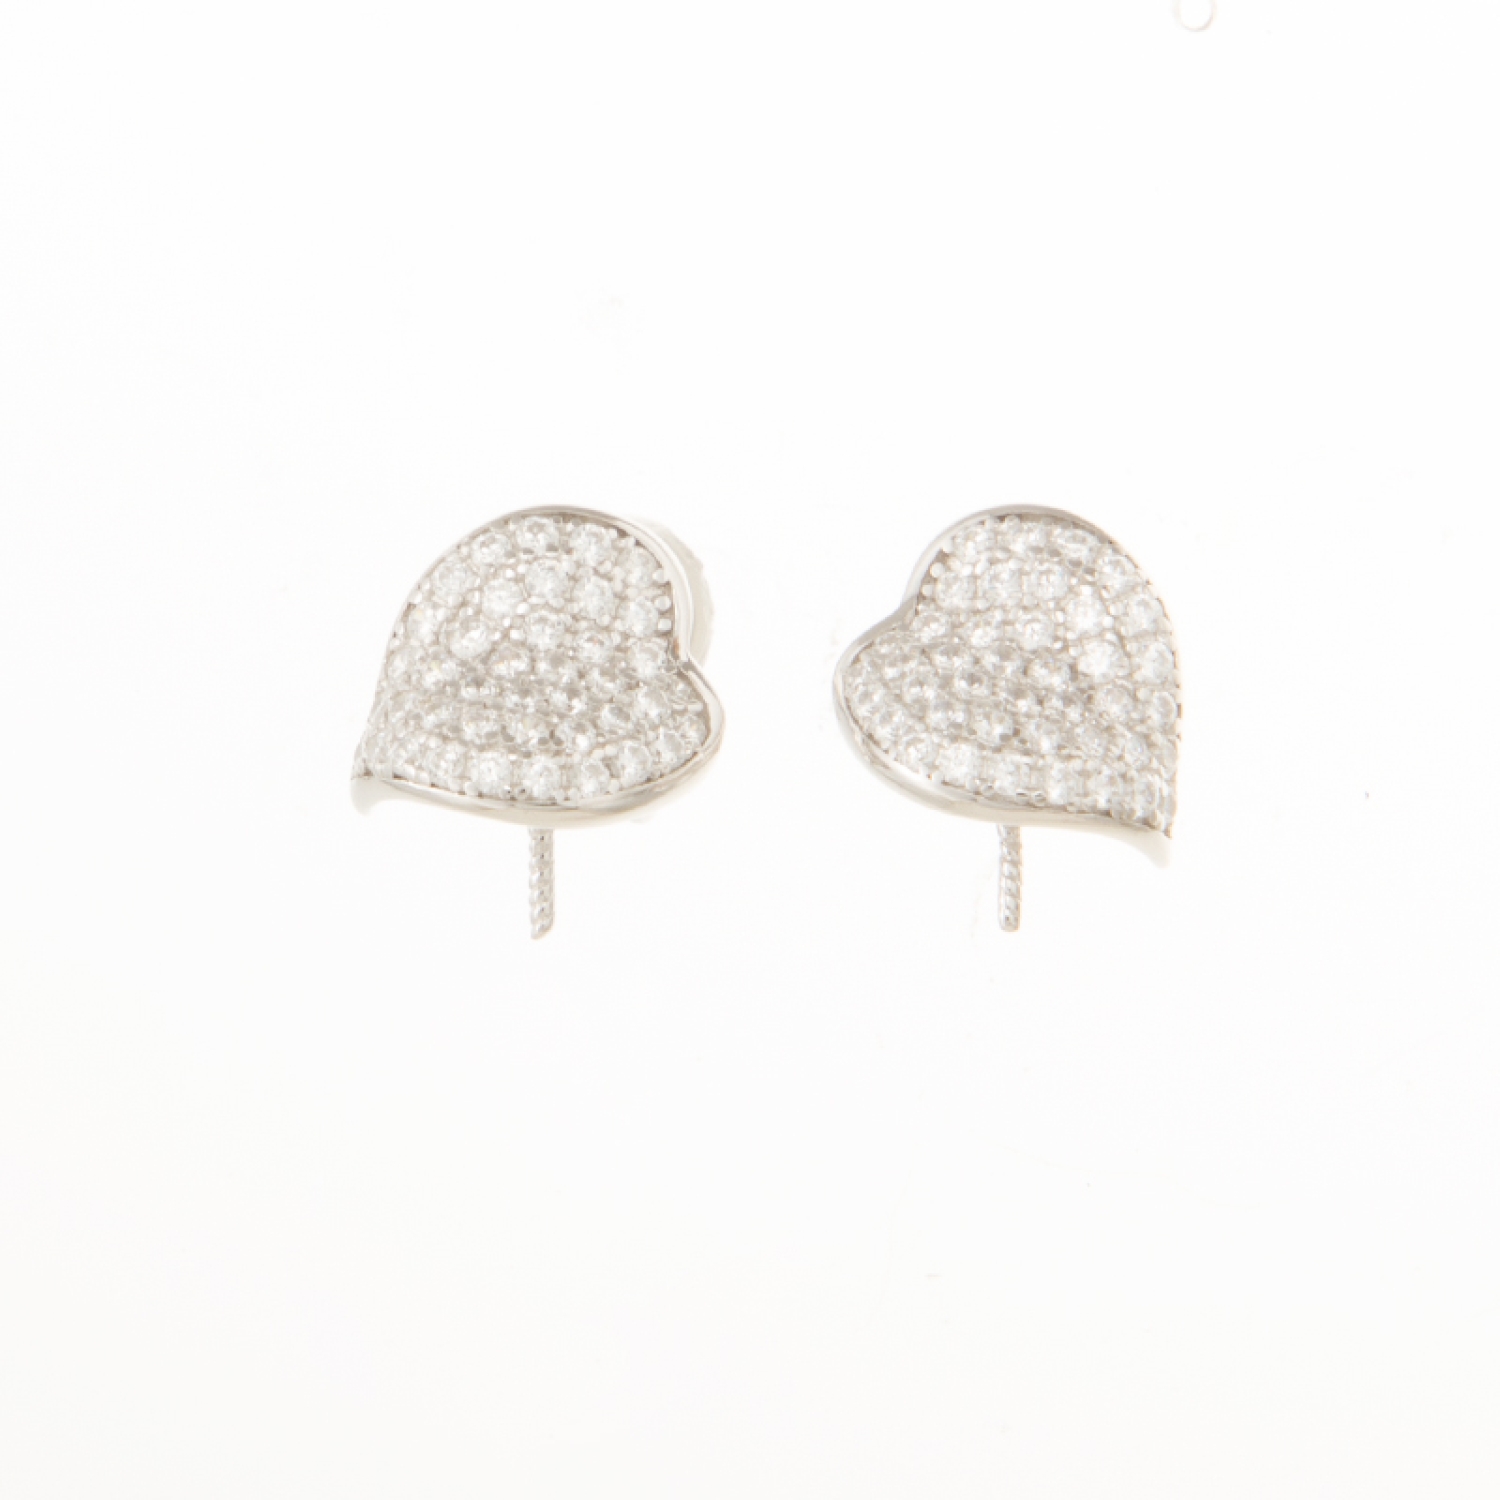 heart shape leaf stud Earrings pave cubic zircon setting in 925 Sterling Silver for Pearls